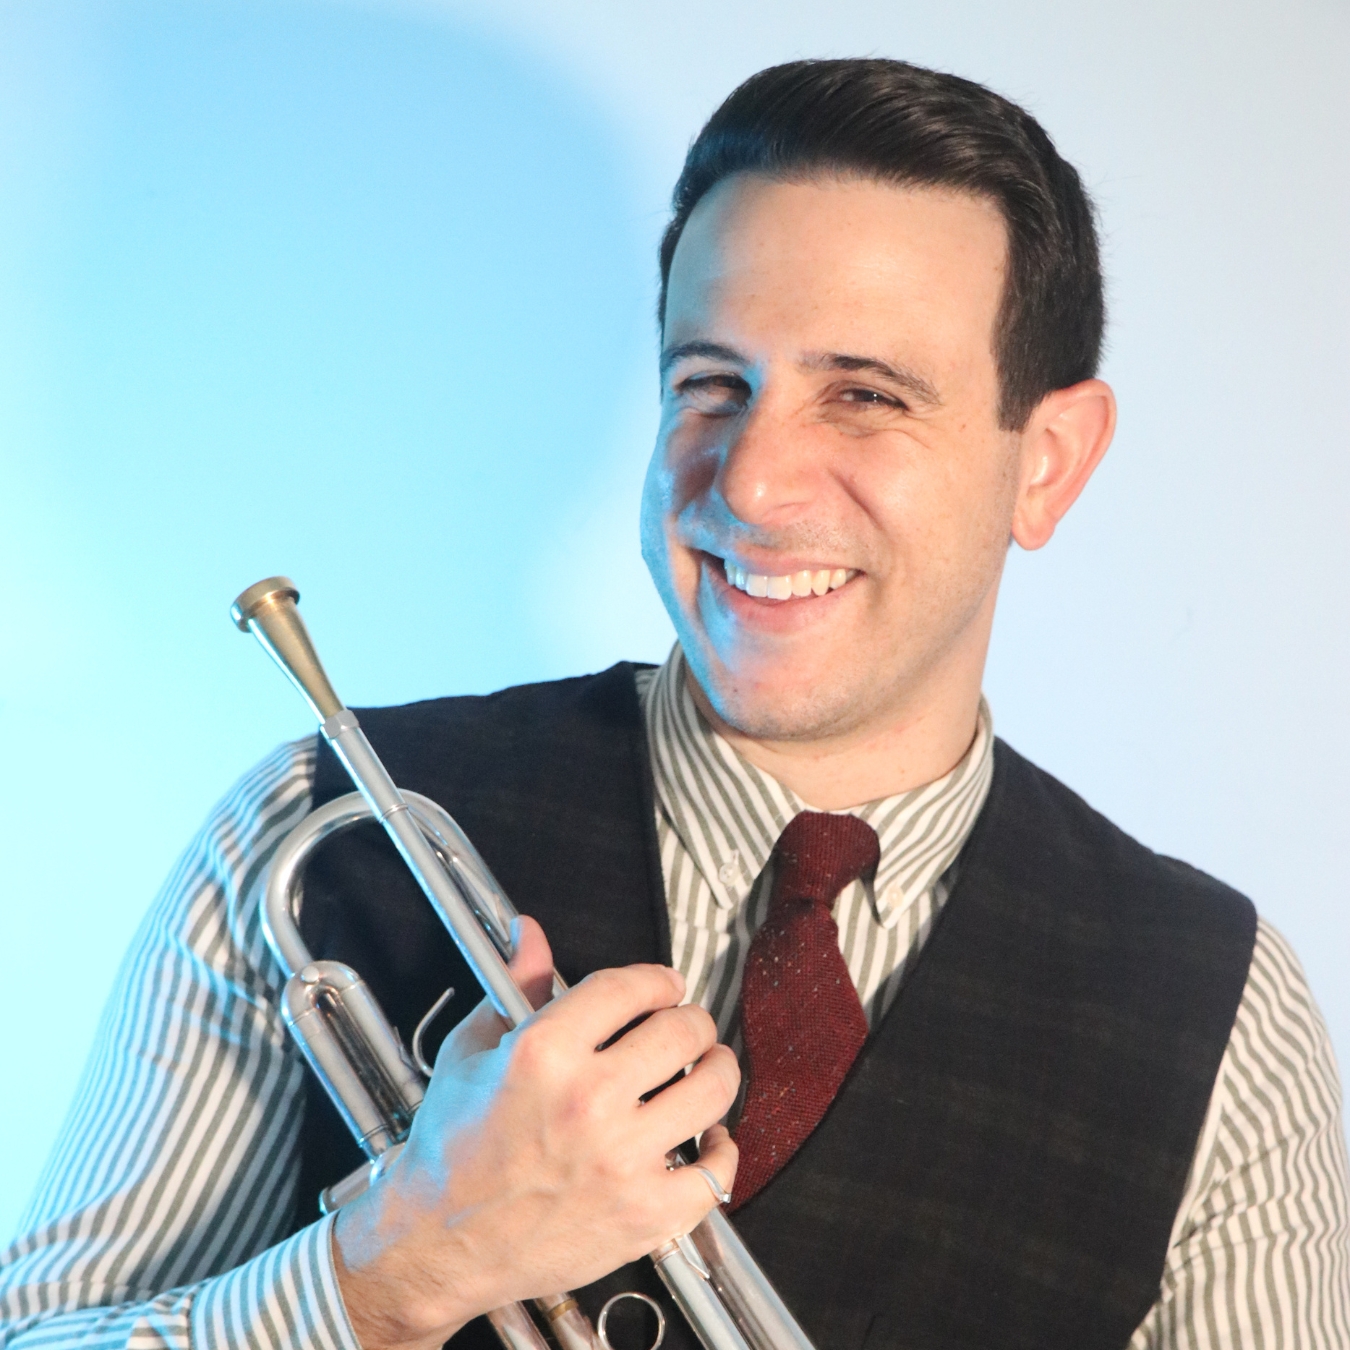 A person of light skin wearing a striped button down, gray sweater vest, and red tie; smiling and holding a trumpet.